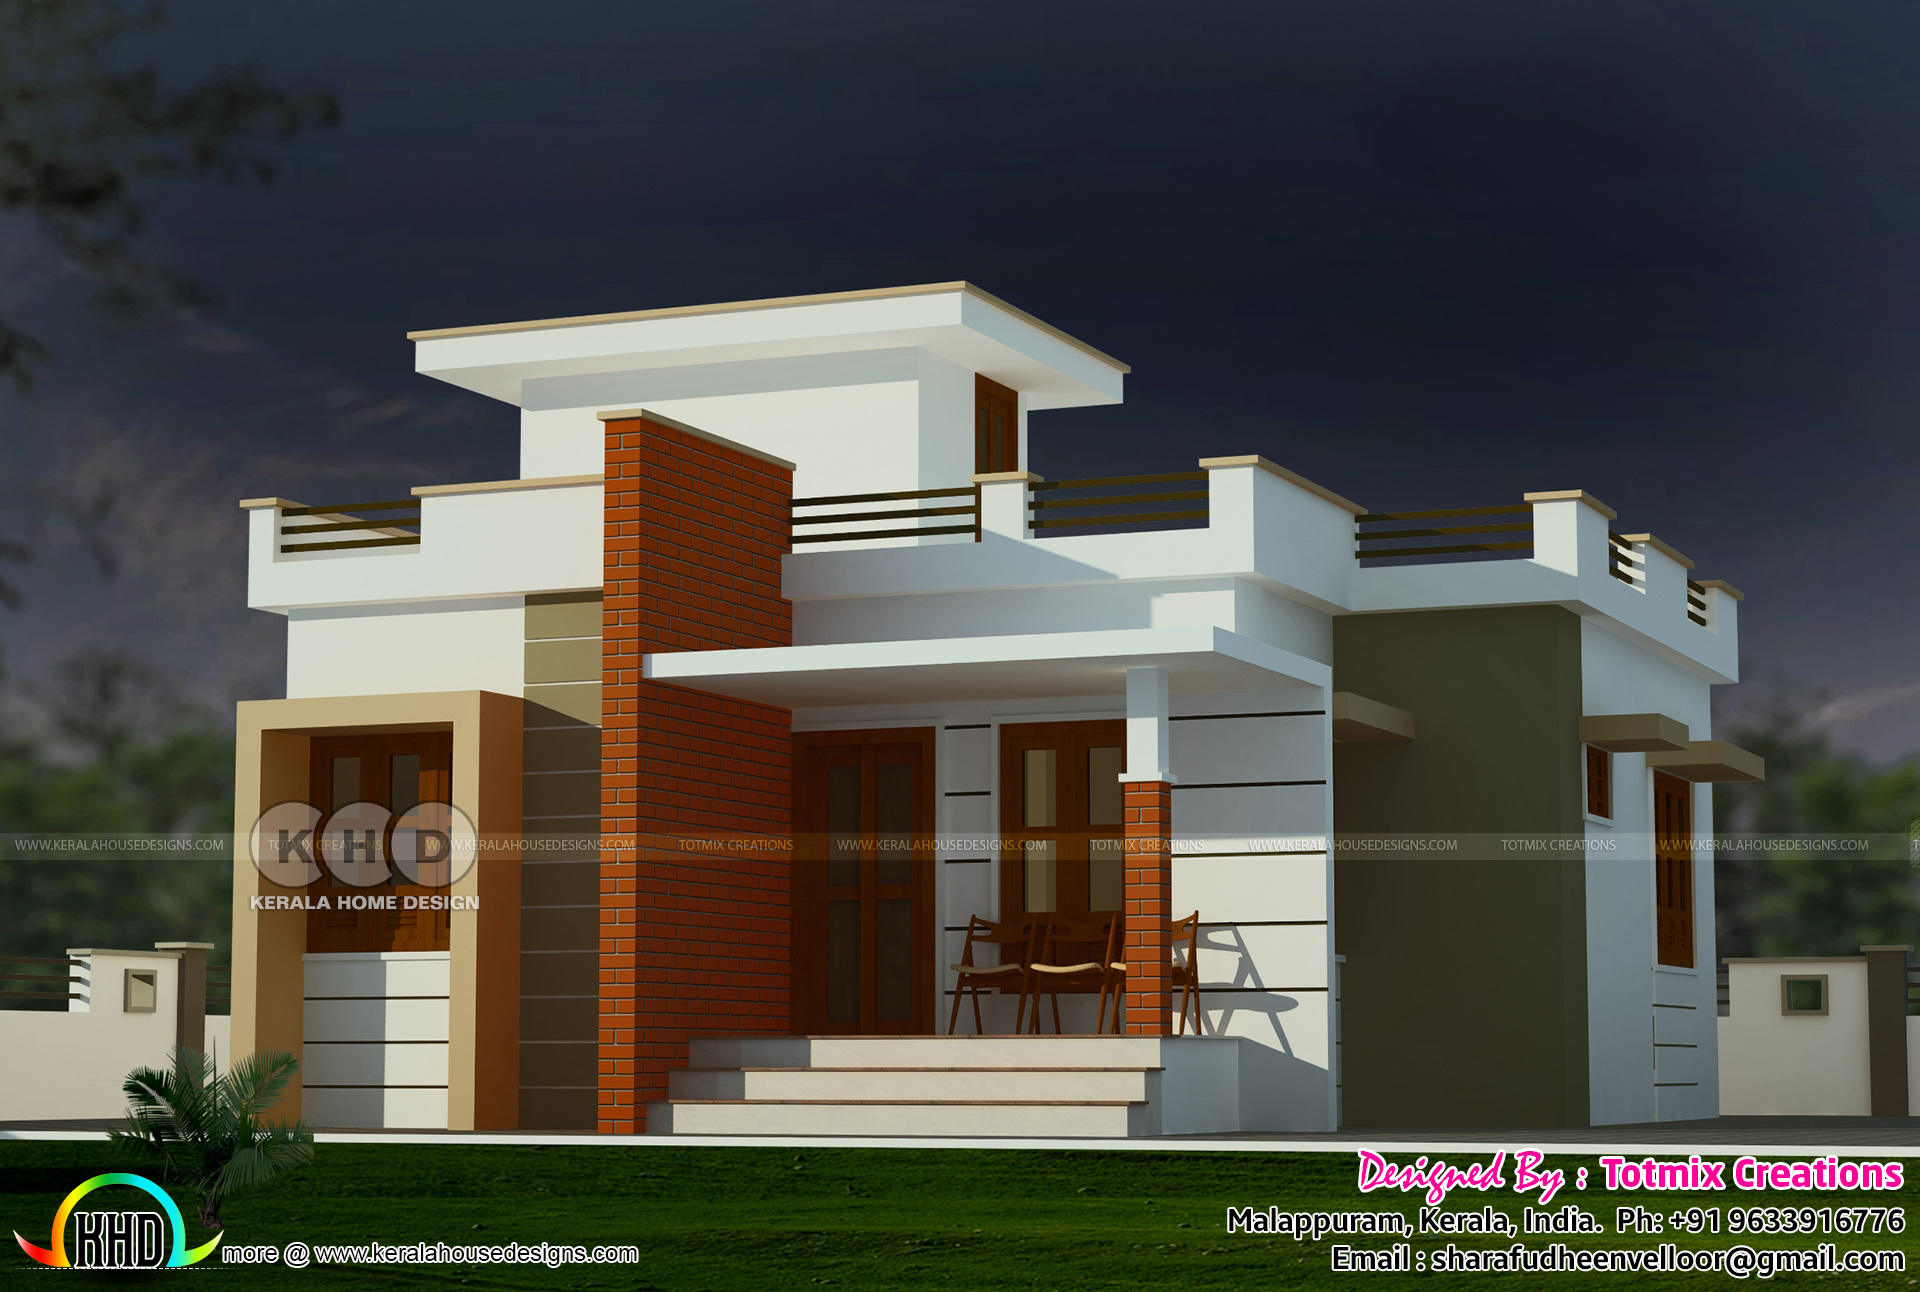 700 Sq-Ft Small Modern Home - Kerala Home Design And Floor Plans - 9K+ House  Designs